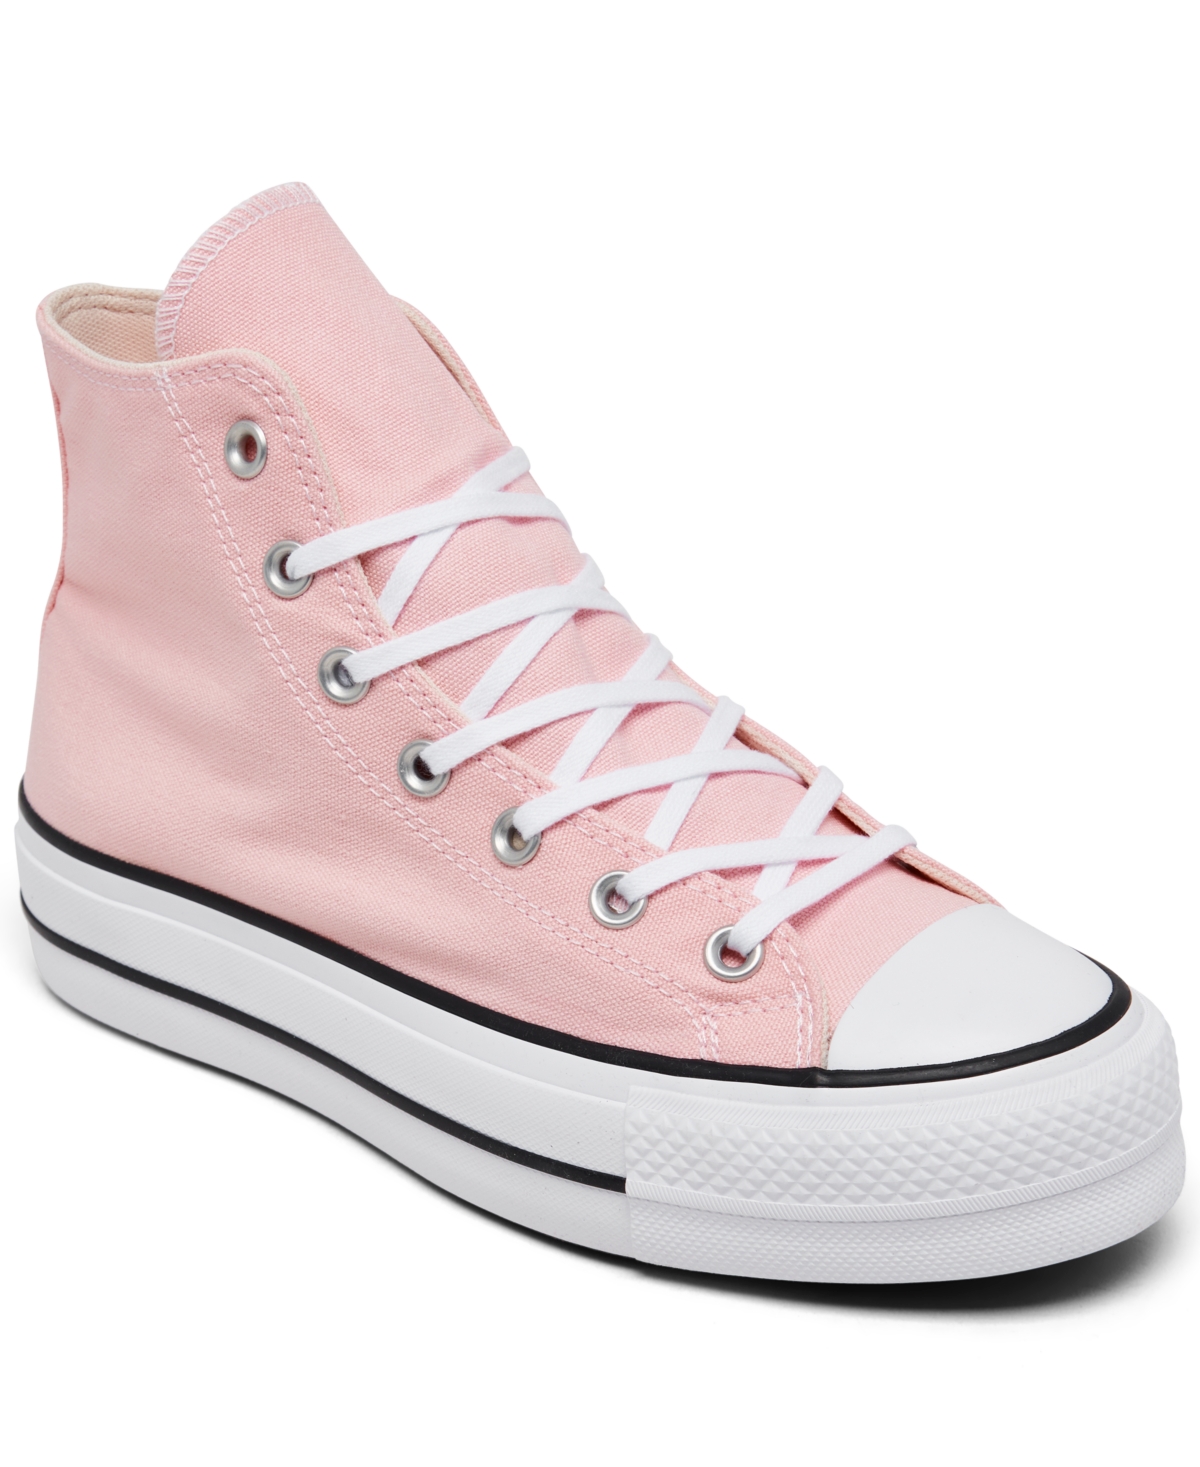 CONVERSE WOMEN'S CHUCK TAYLOR ALL STAR LIFT PLATFORM CANVAS HIGH TOP CASUAL SNEAKERS FROM FINISH LINE